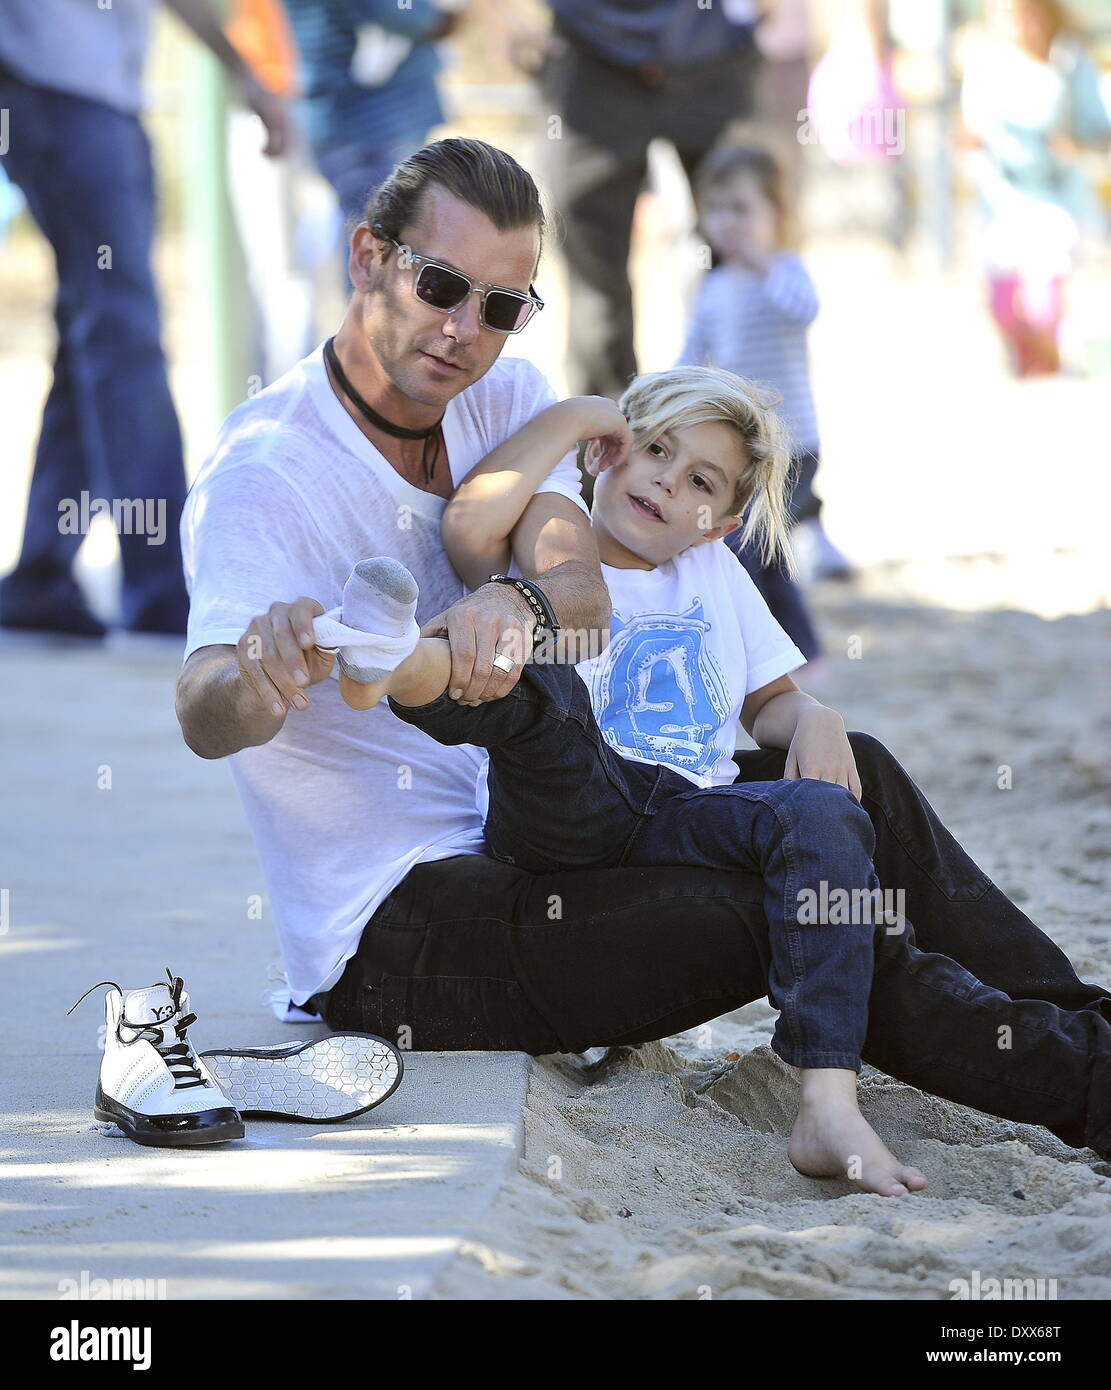 Gavin Rossdale and Kingston Rossdale Gavin Rossdale helps to put his son's sneakers on at a park in Santa Monica Los Angeles California - 24.11.12 Featuring: Gavin Rossdale and Kingston Rossdale When: 24 Nov 2012 Stock Photo